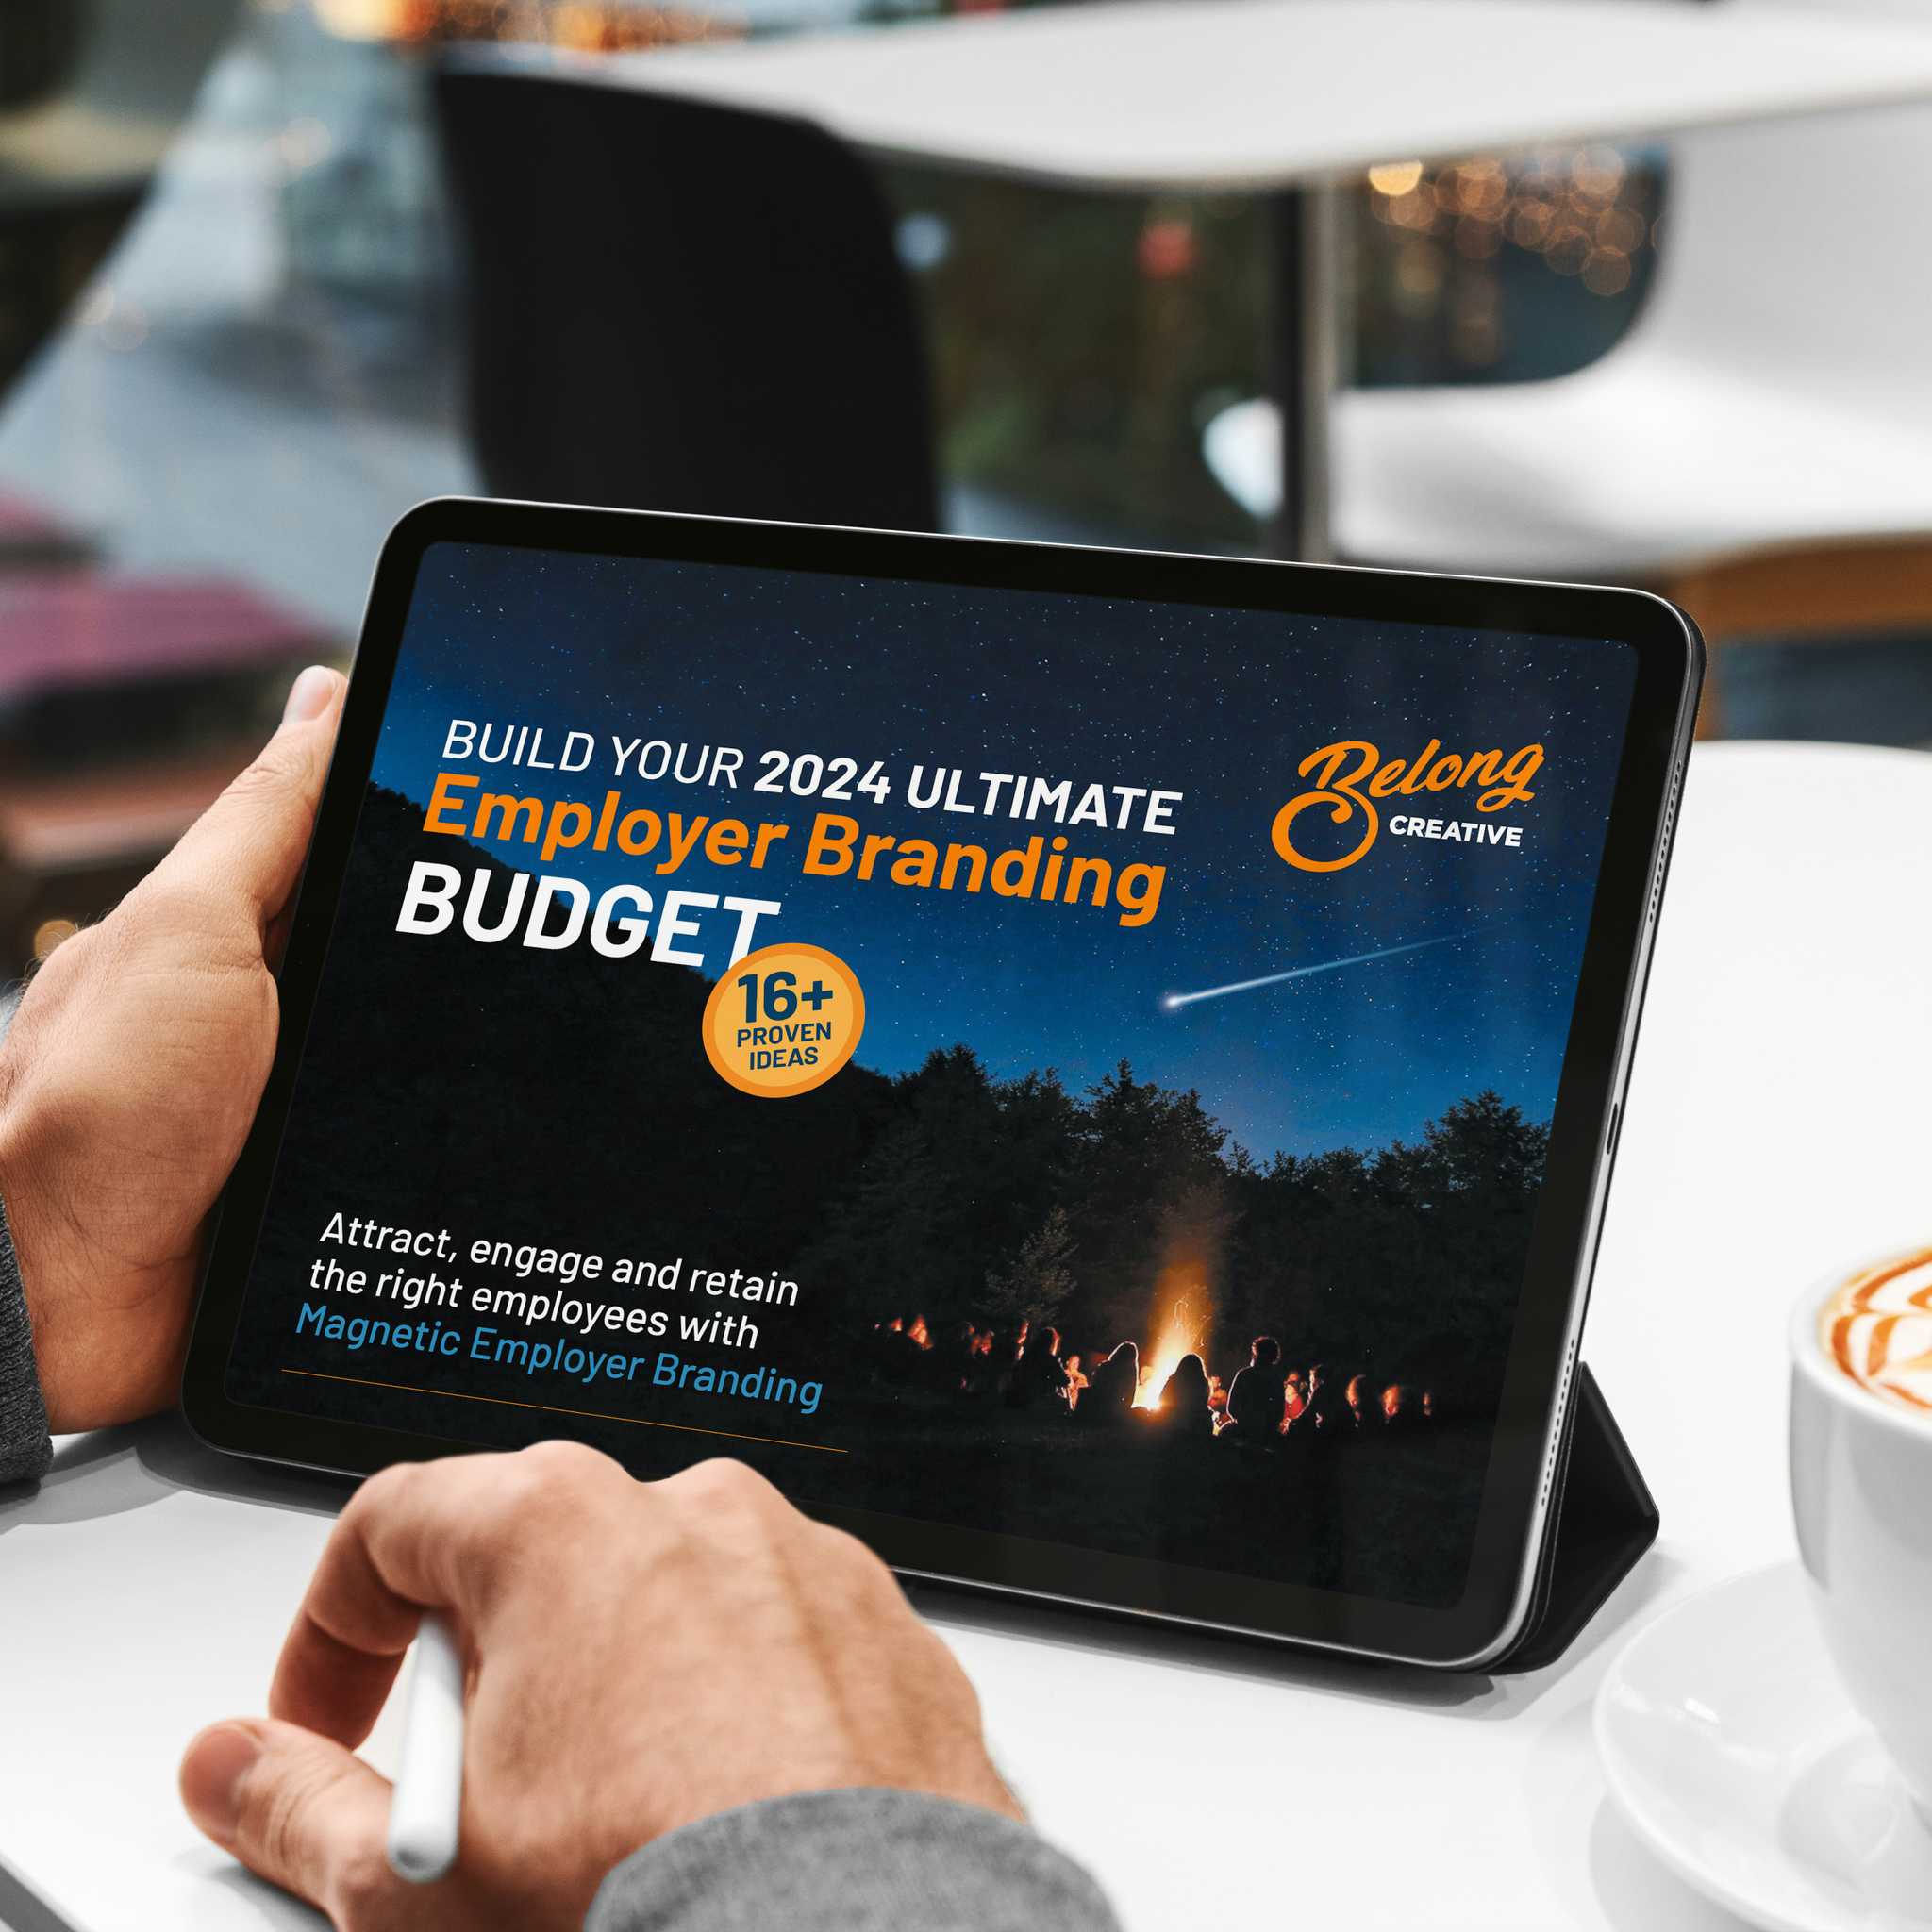 Man at Cafe looking at Employer Brand Budget ebook